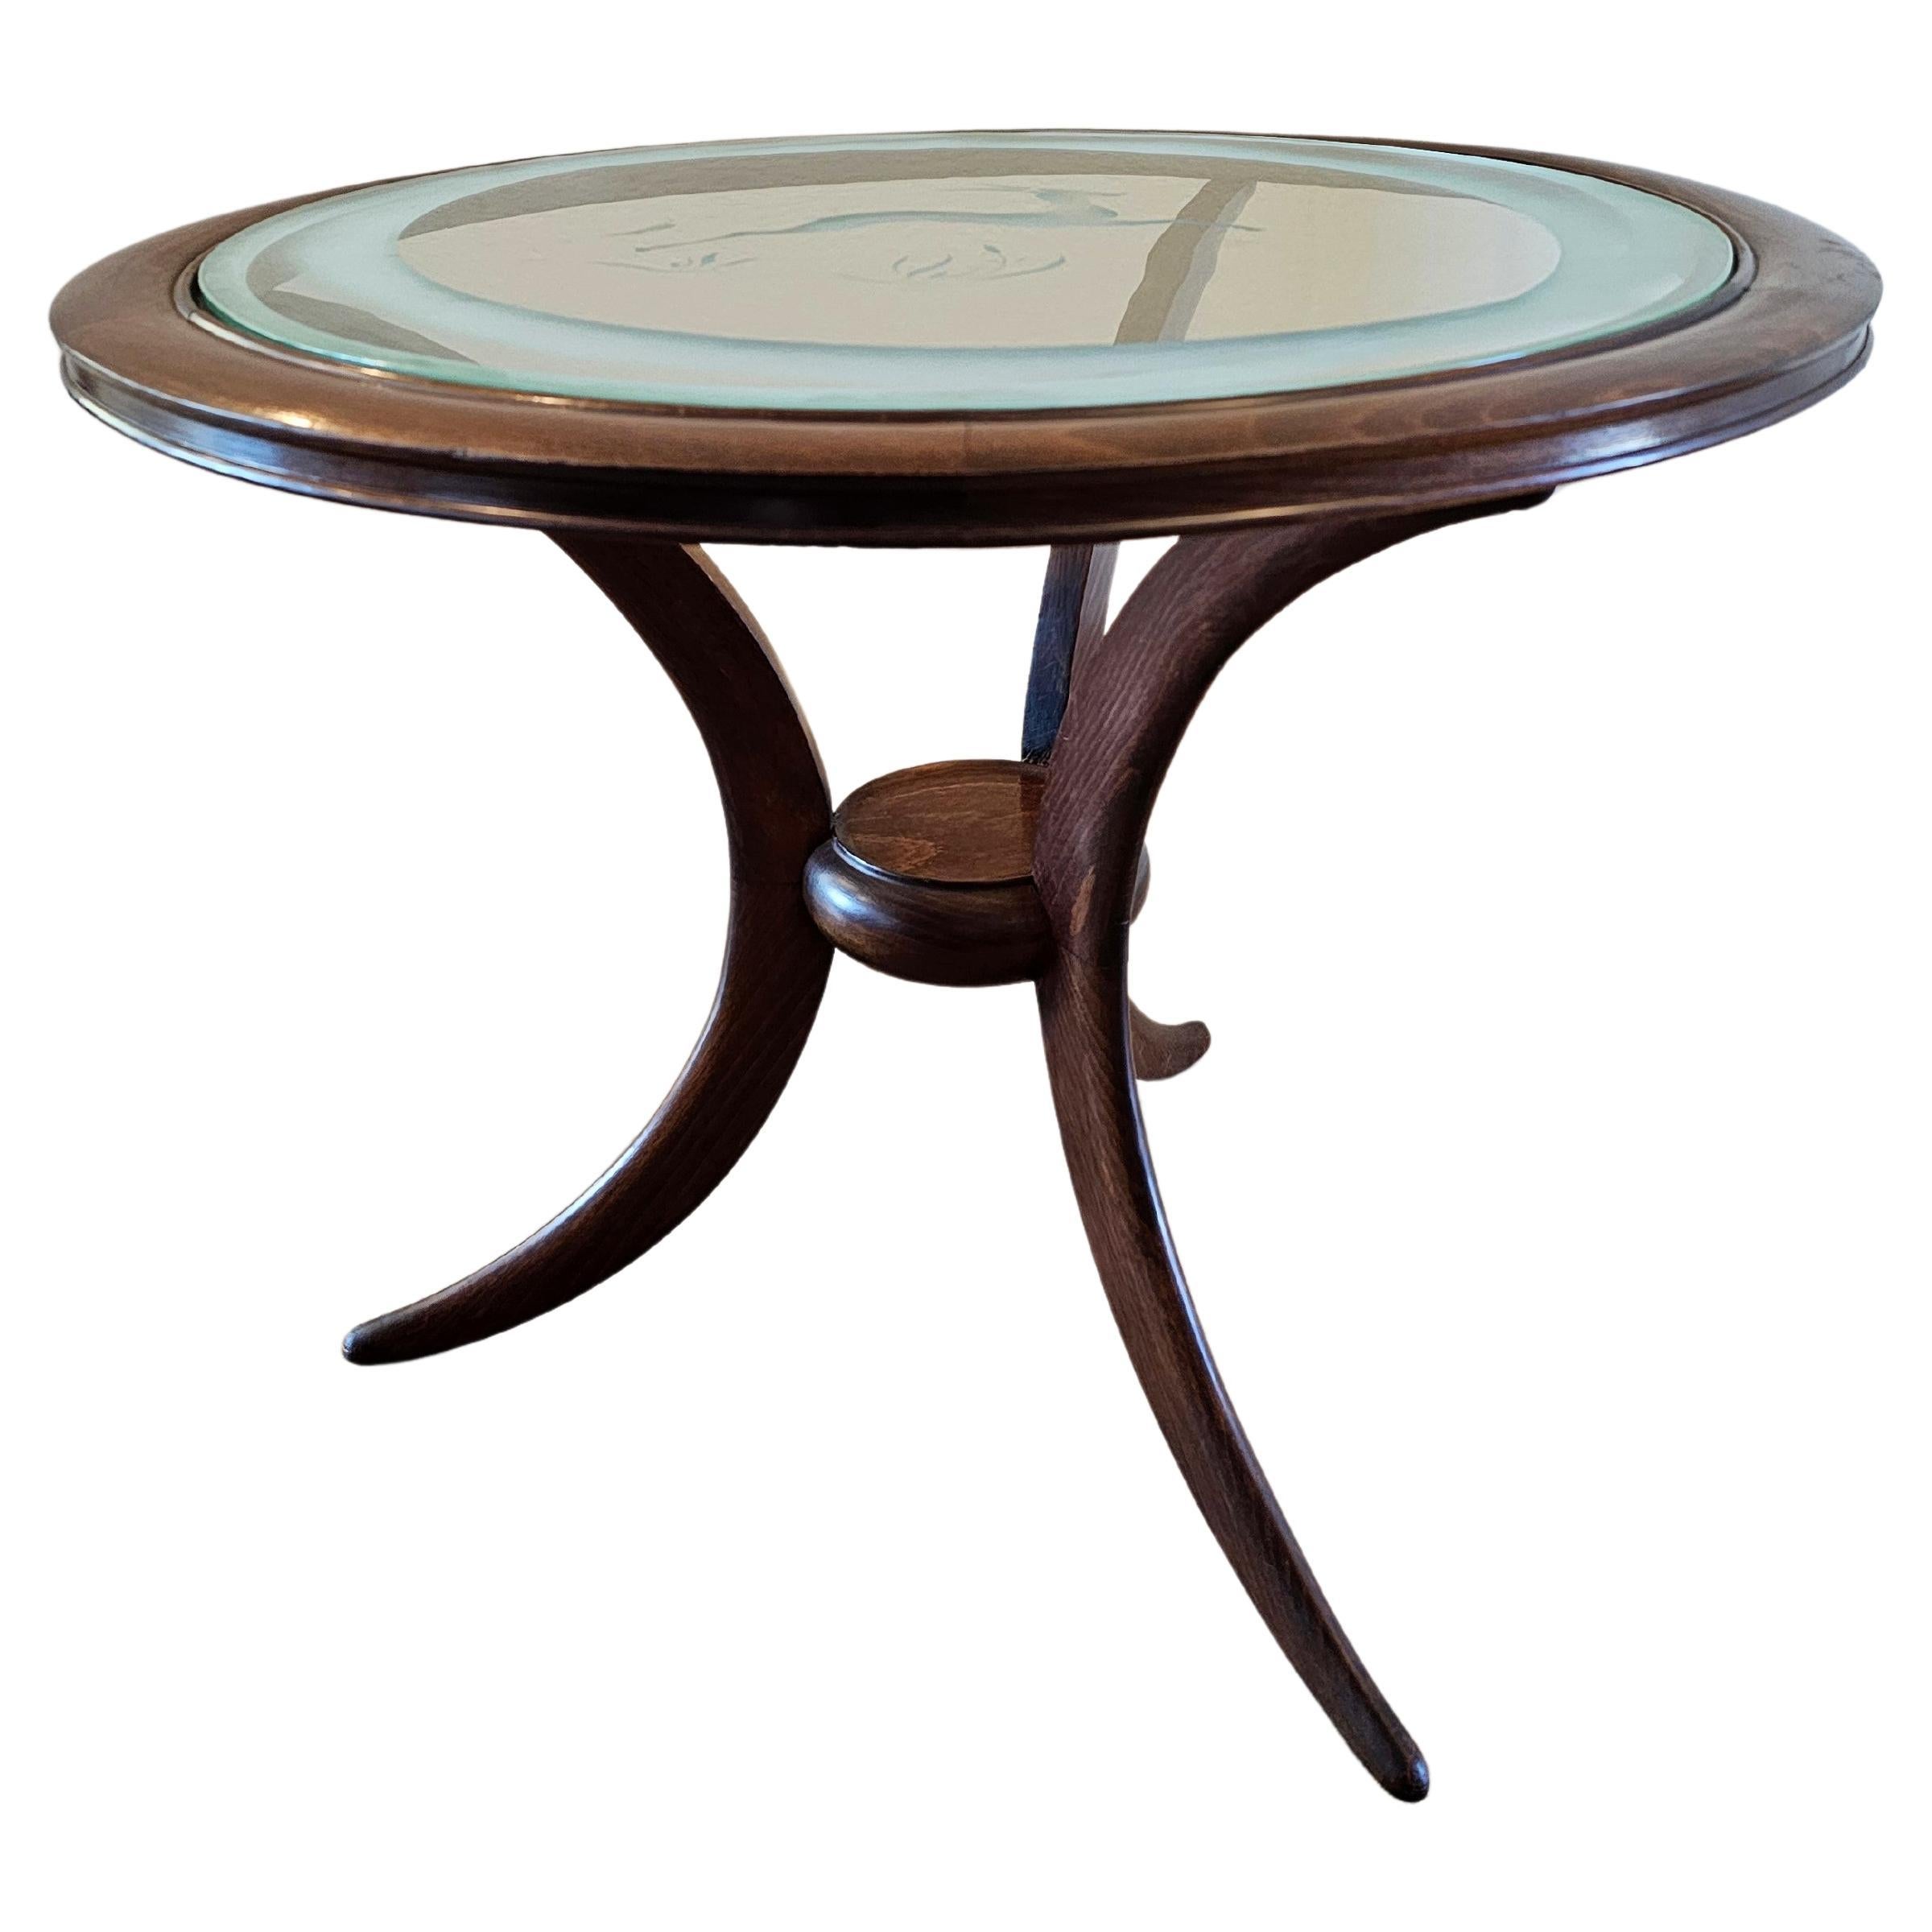 1940s Italian Mid-Century Modern Round Etched Glass Side Table  For Sale